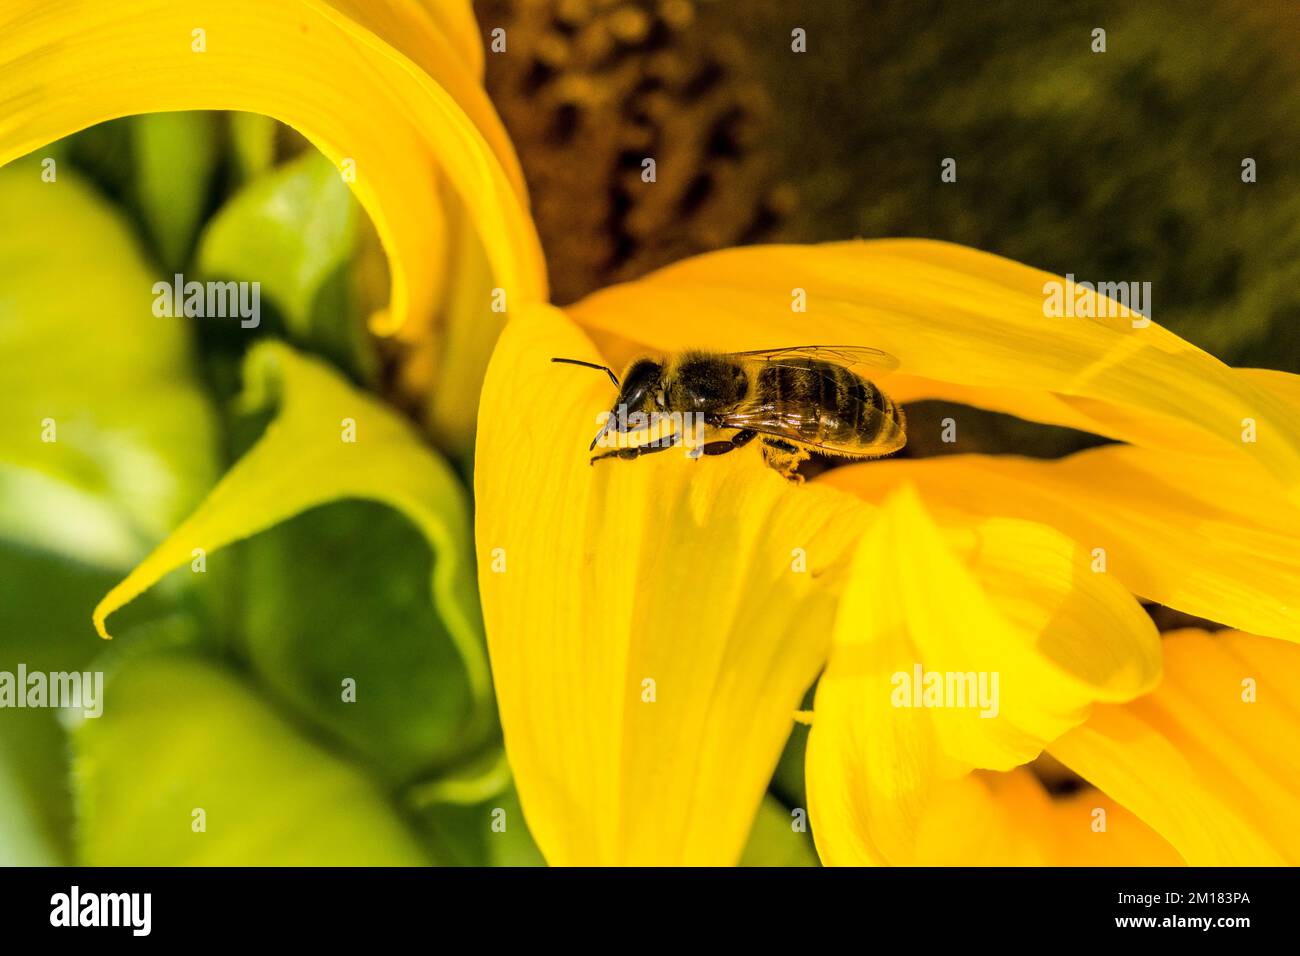 A Carniolan honey bee (Apis mellifera carnica) is sitting on a common sunflower (Helianthus annuus) leaf Stock Photo